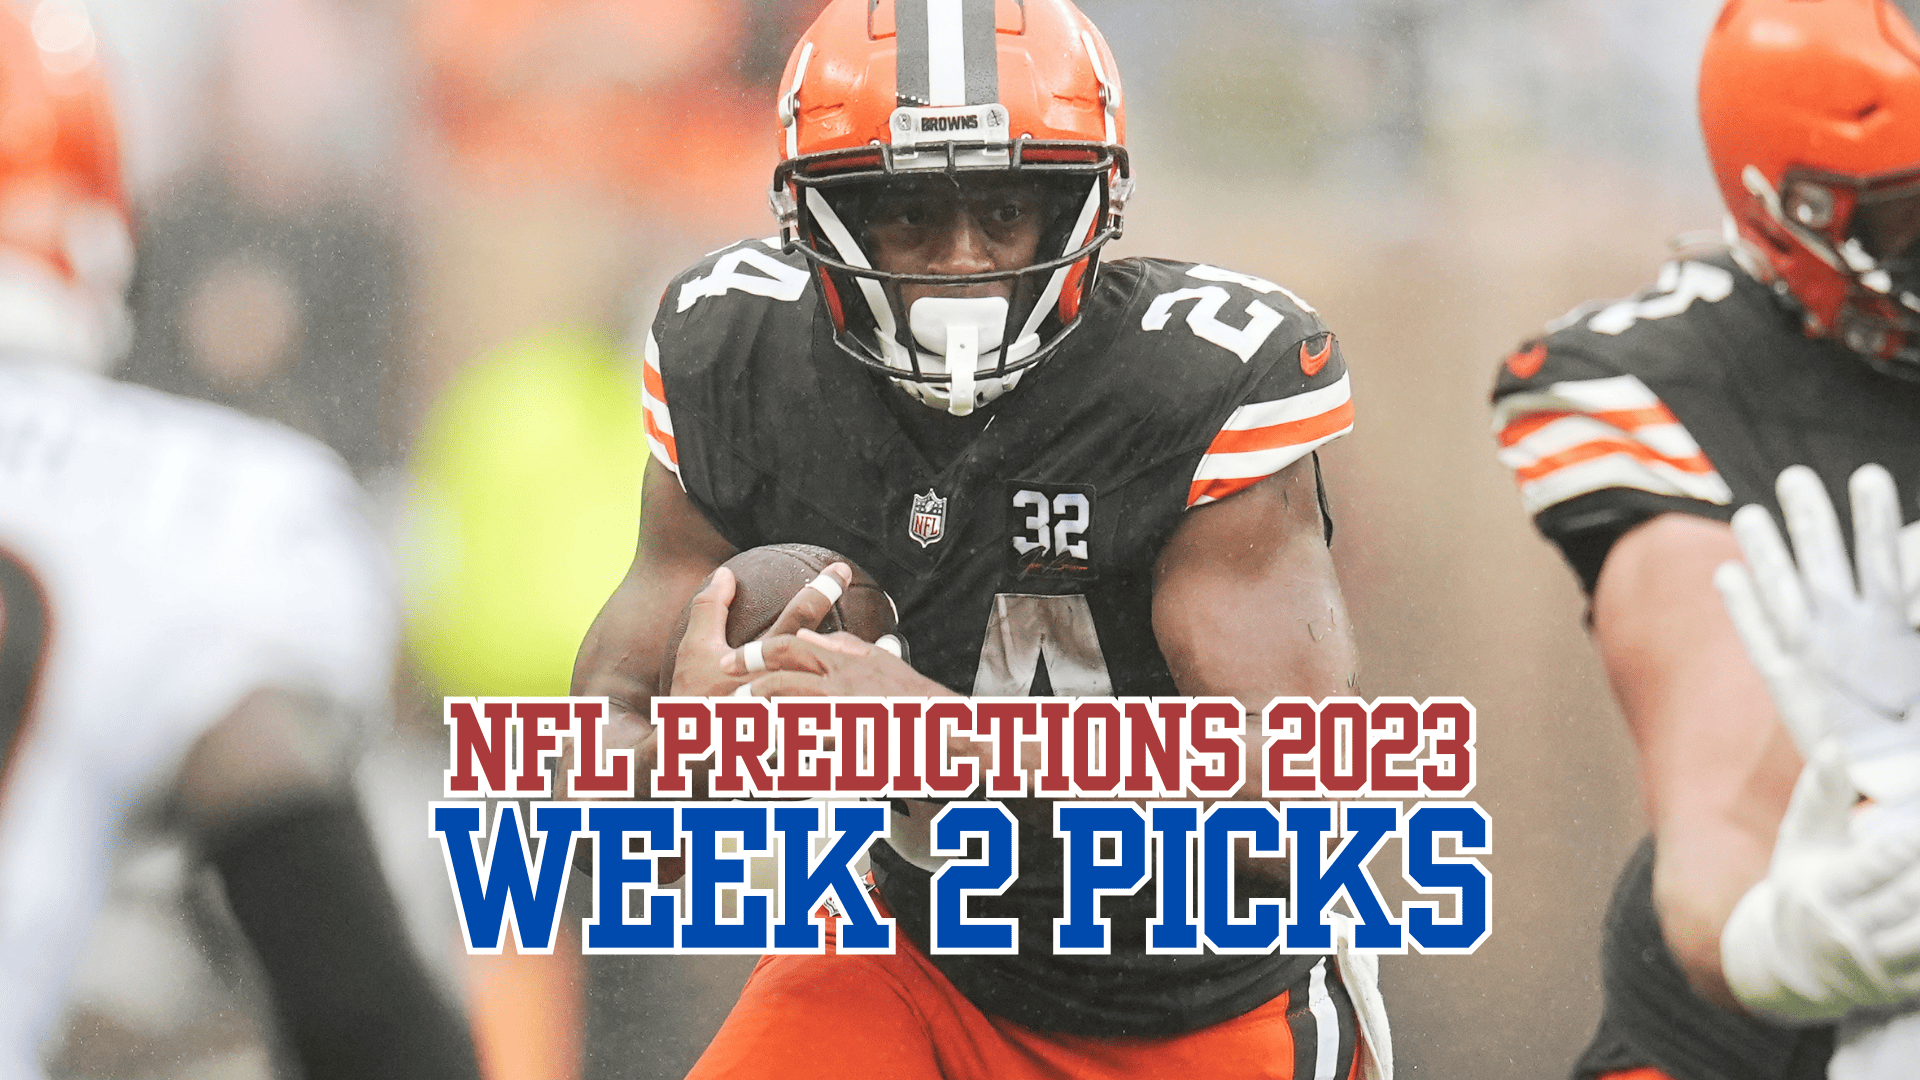 Our top NFL Week 2 predictions include picks for Vikings Eagles, Colts-Texans, Dolphins-Patriots and much more, so keep reading for...